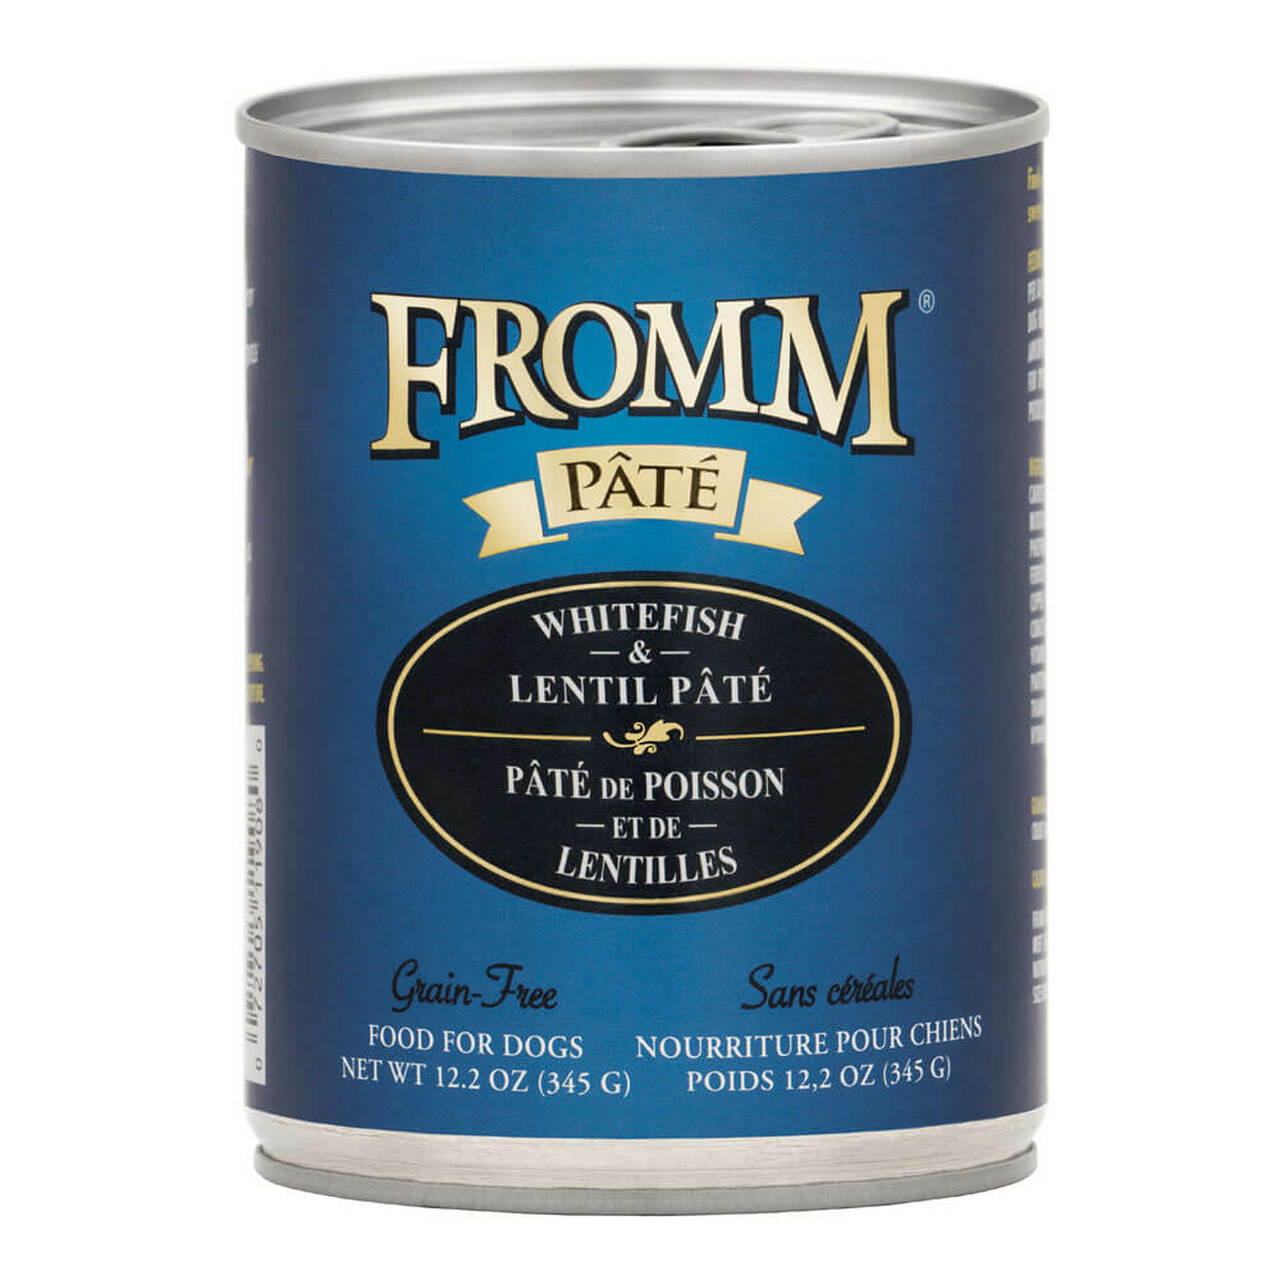 Fromm Whitefish & Lentil Pate Wet Dog Food